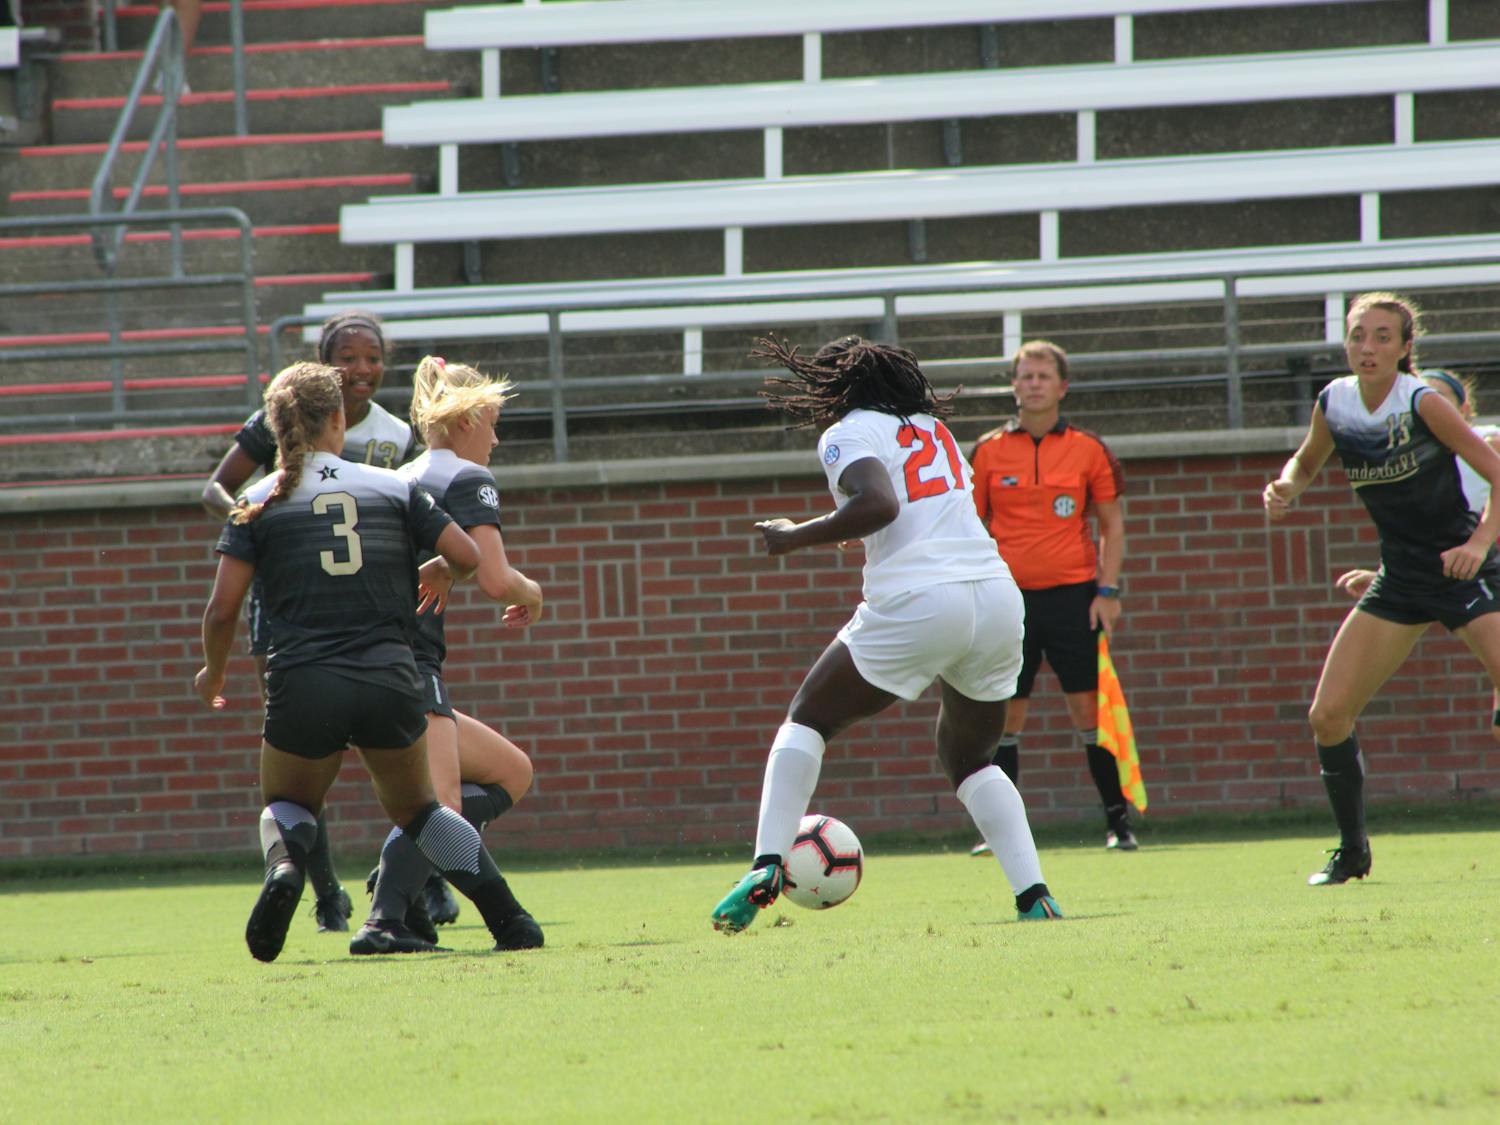 Forward Deanne Rose (21) scored two goals in Florida's season-opening win over FAU, including the overtime winner.